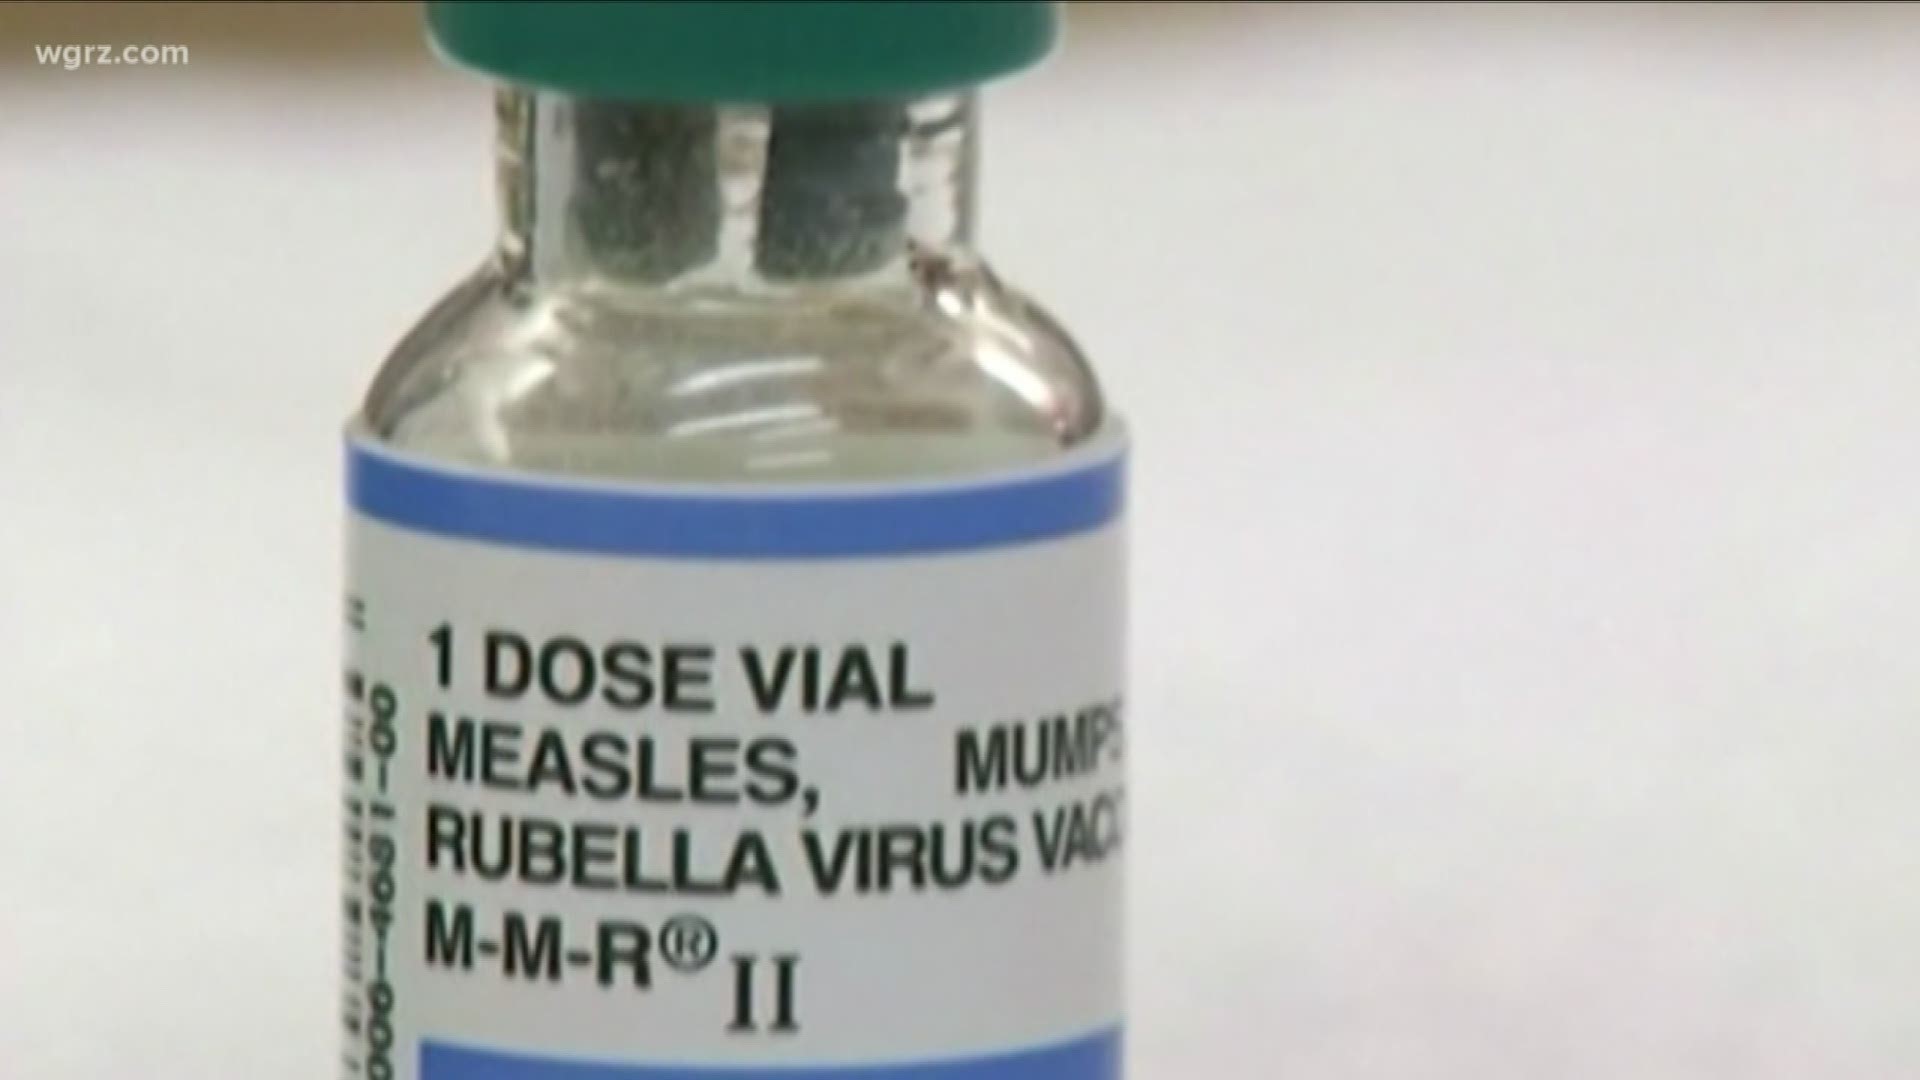 NY lawmakers: Let minors get vaccinated even if parents balk